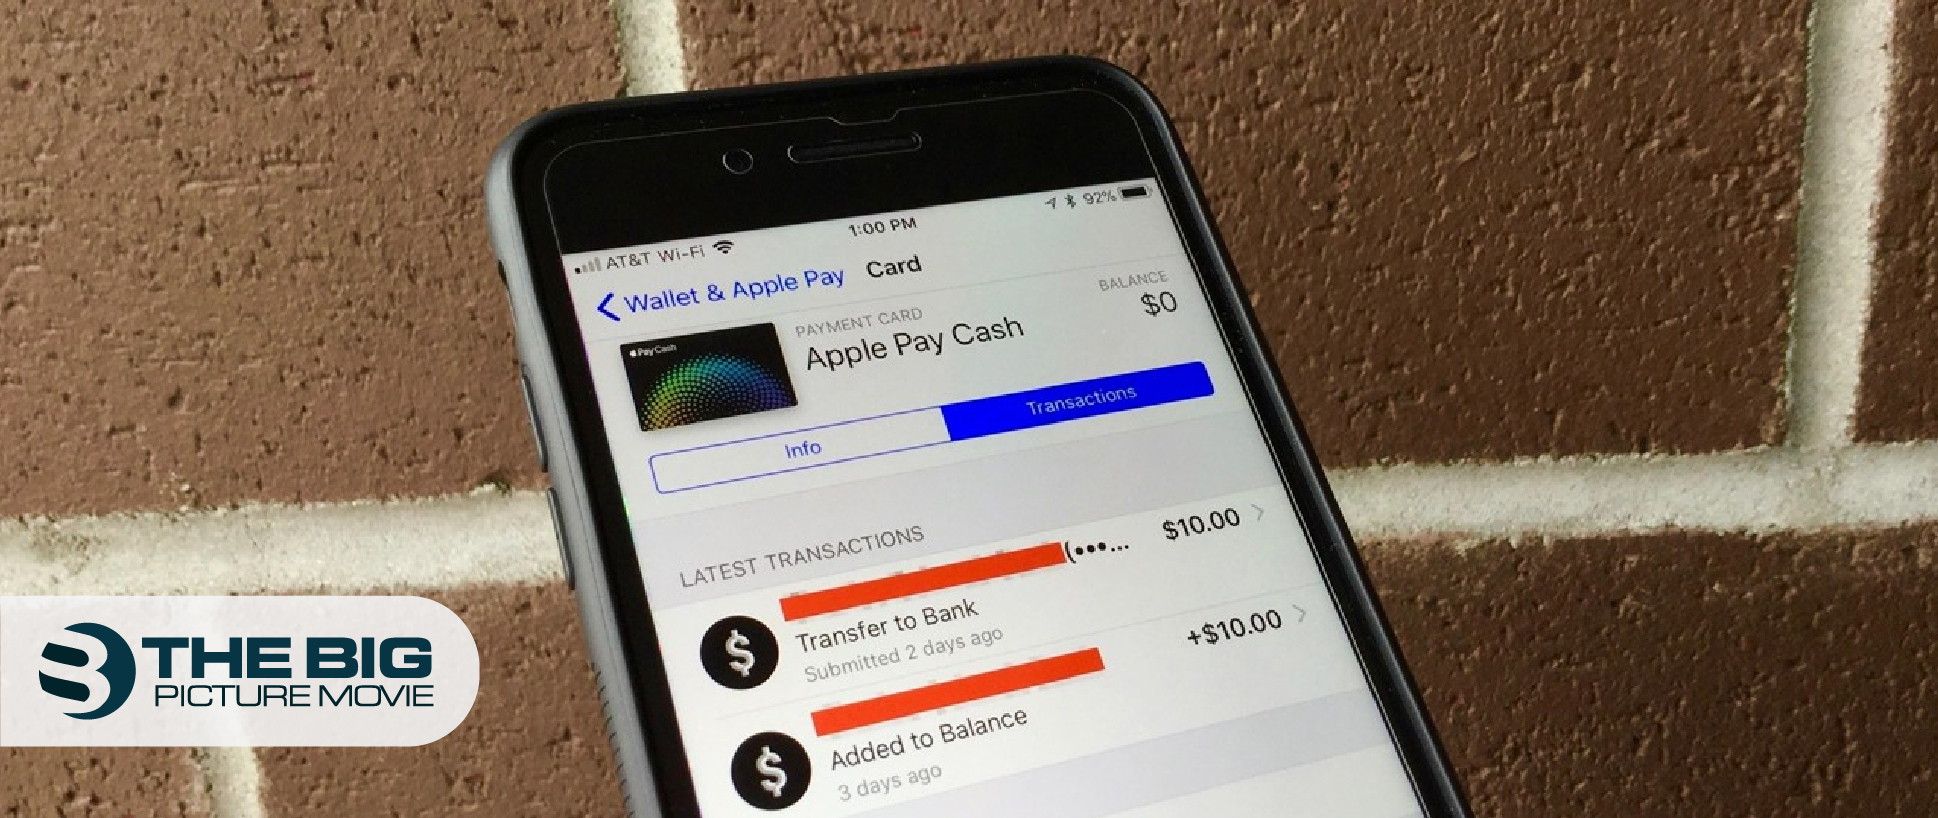 Check Apple Pay Transaction after transfer money